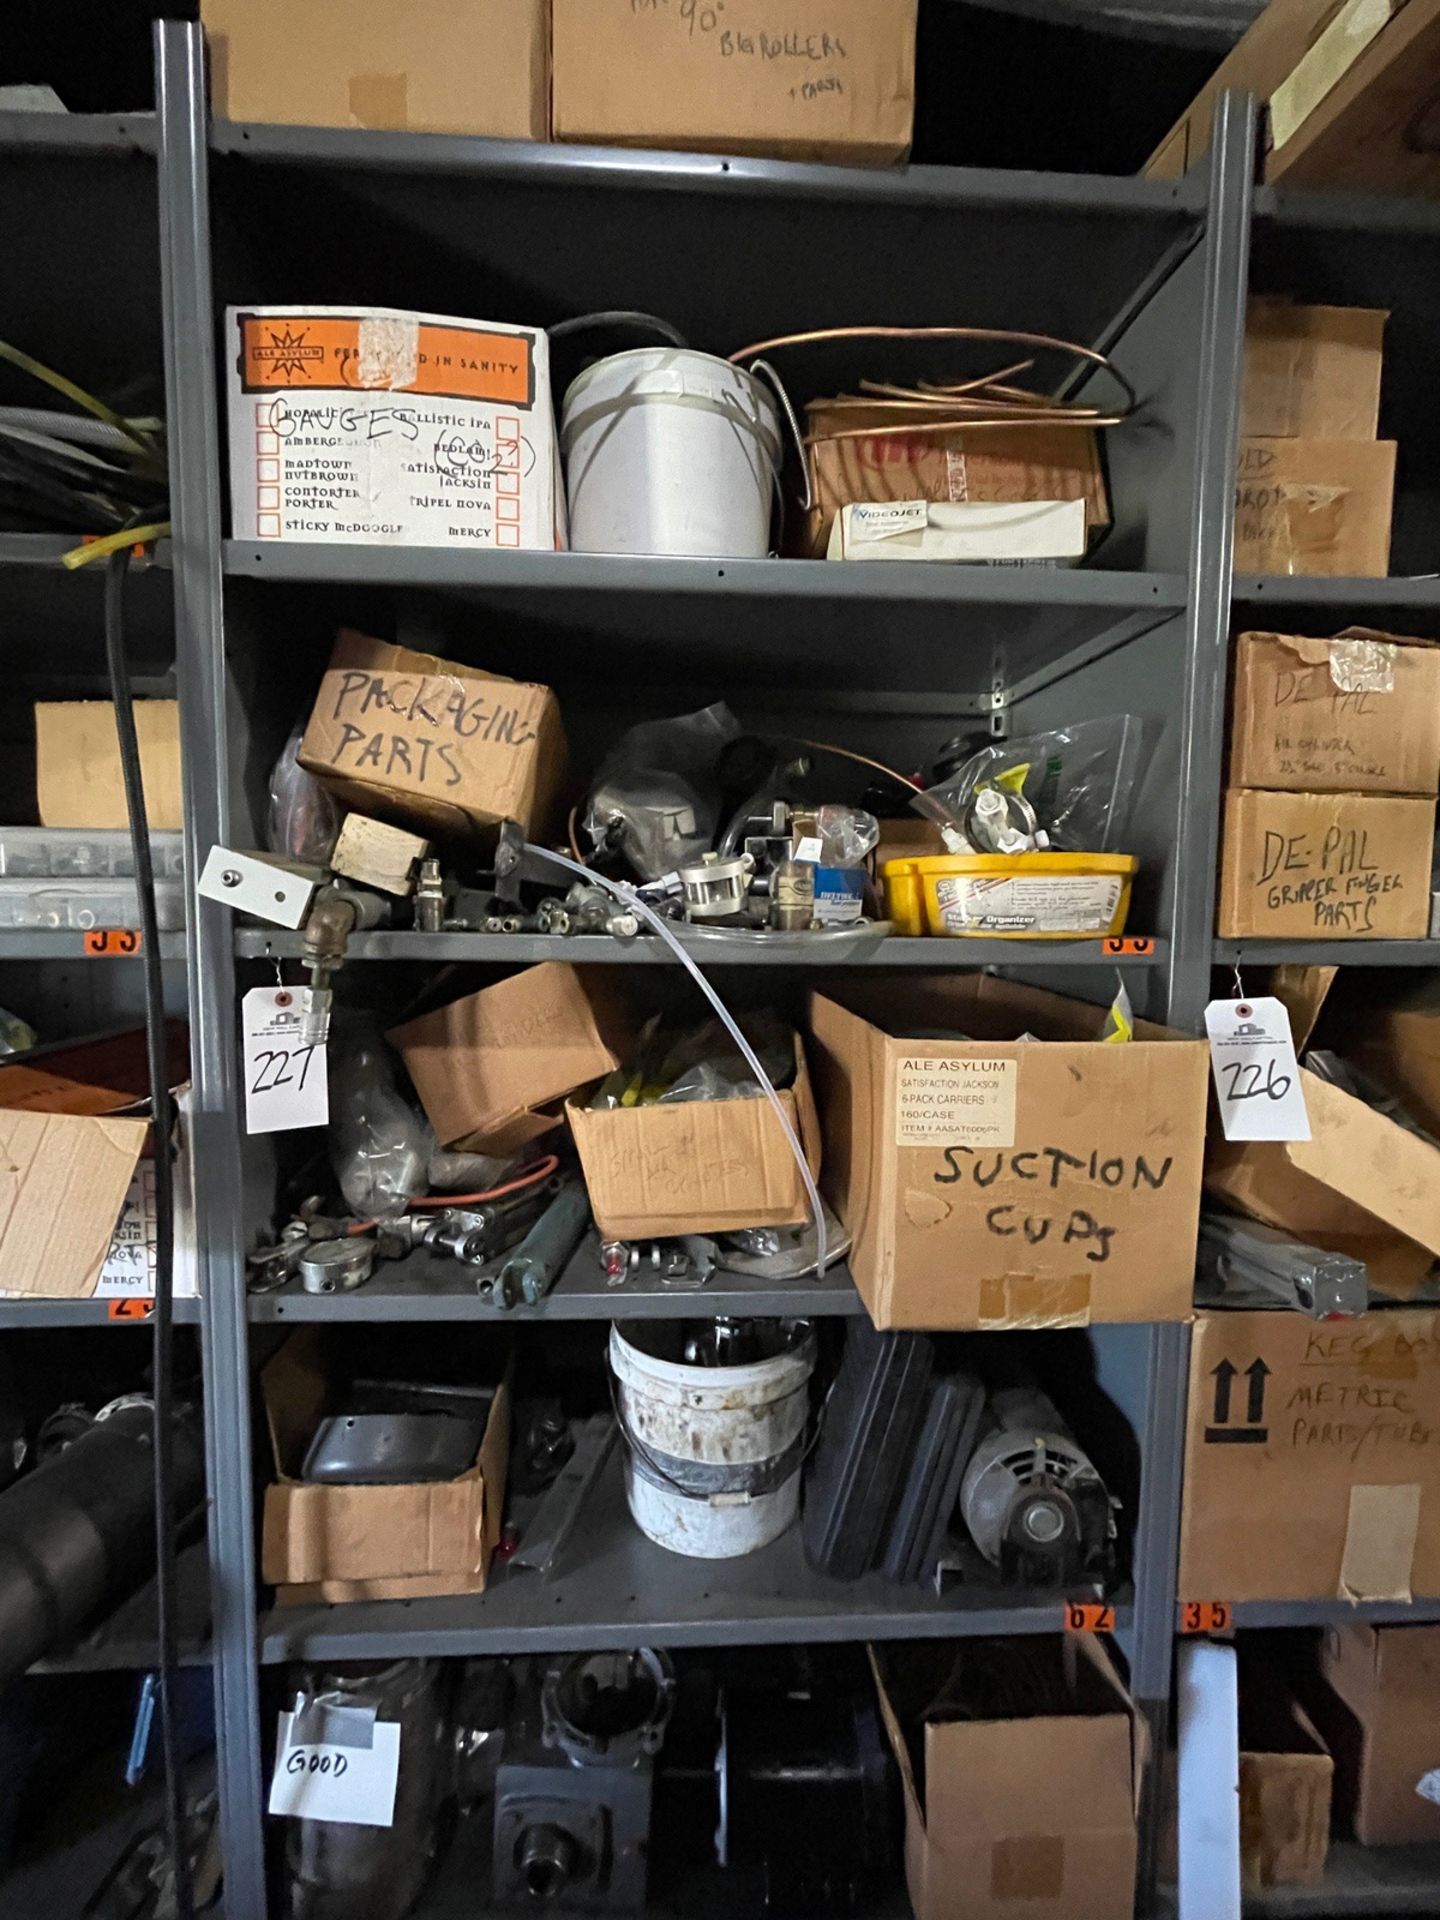 Section of Parts Shelves (includes items on shelf and shelving unit), - Subj to Bulk | Rig Fee $200